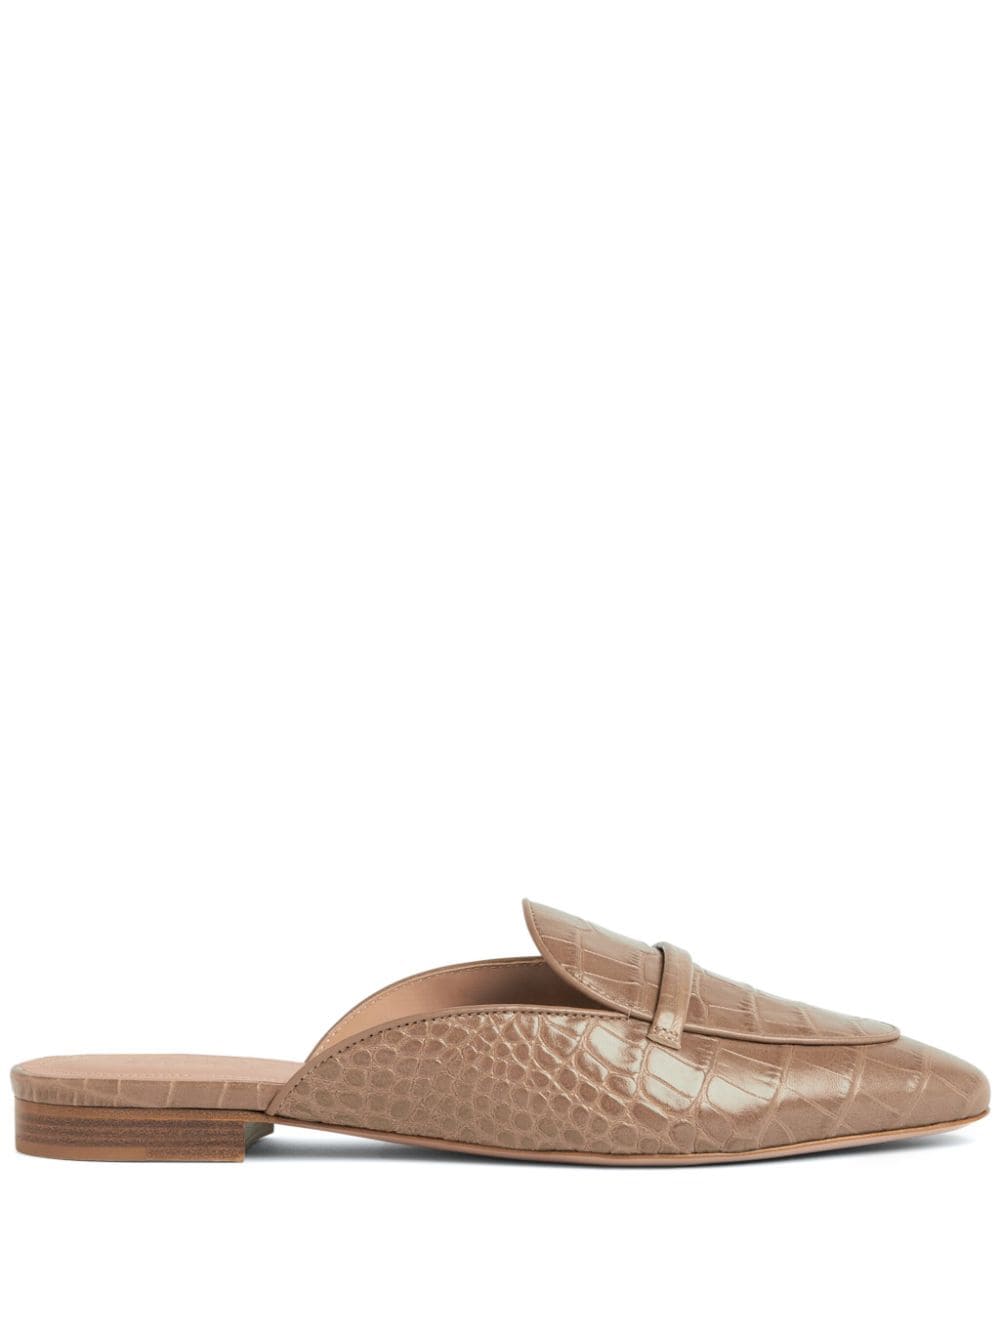 Malone Souliers Berto crocodile-embossed leather mules - Neutrals von Malone Souliers